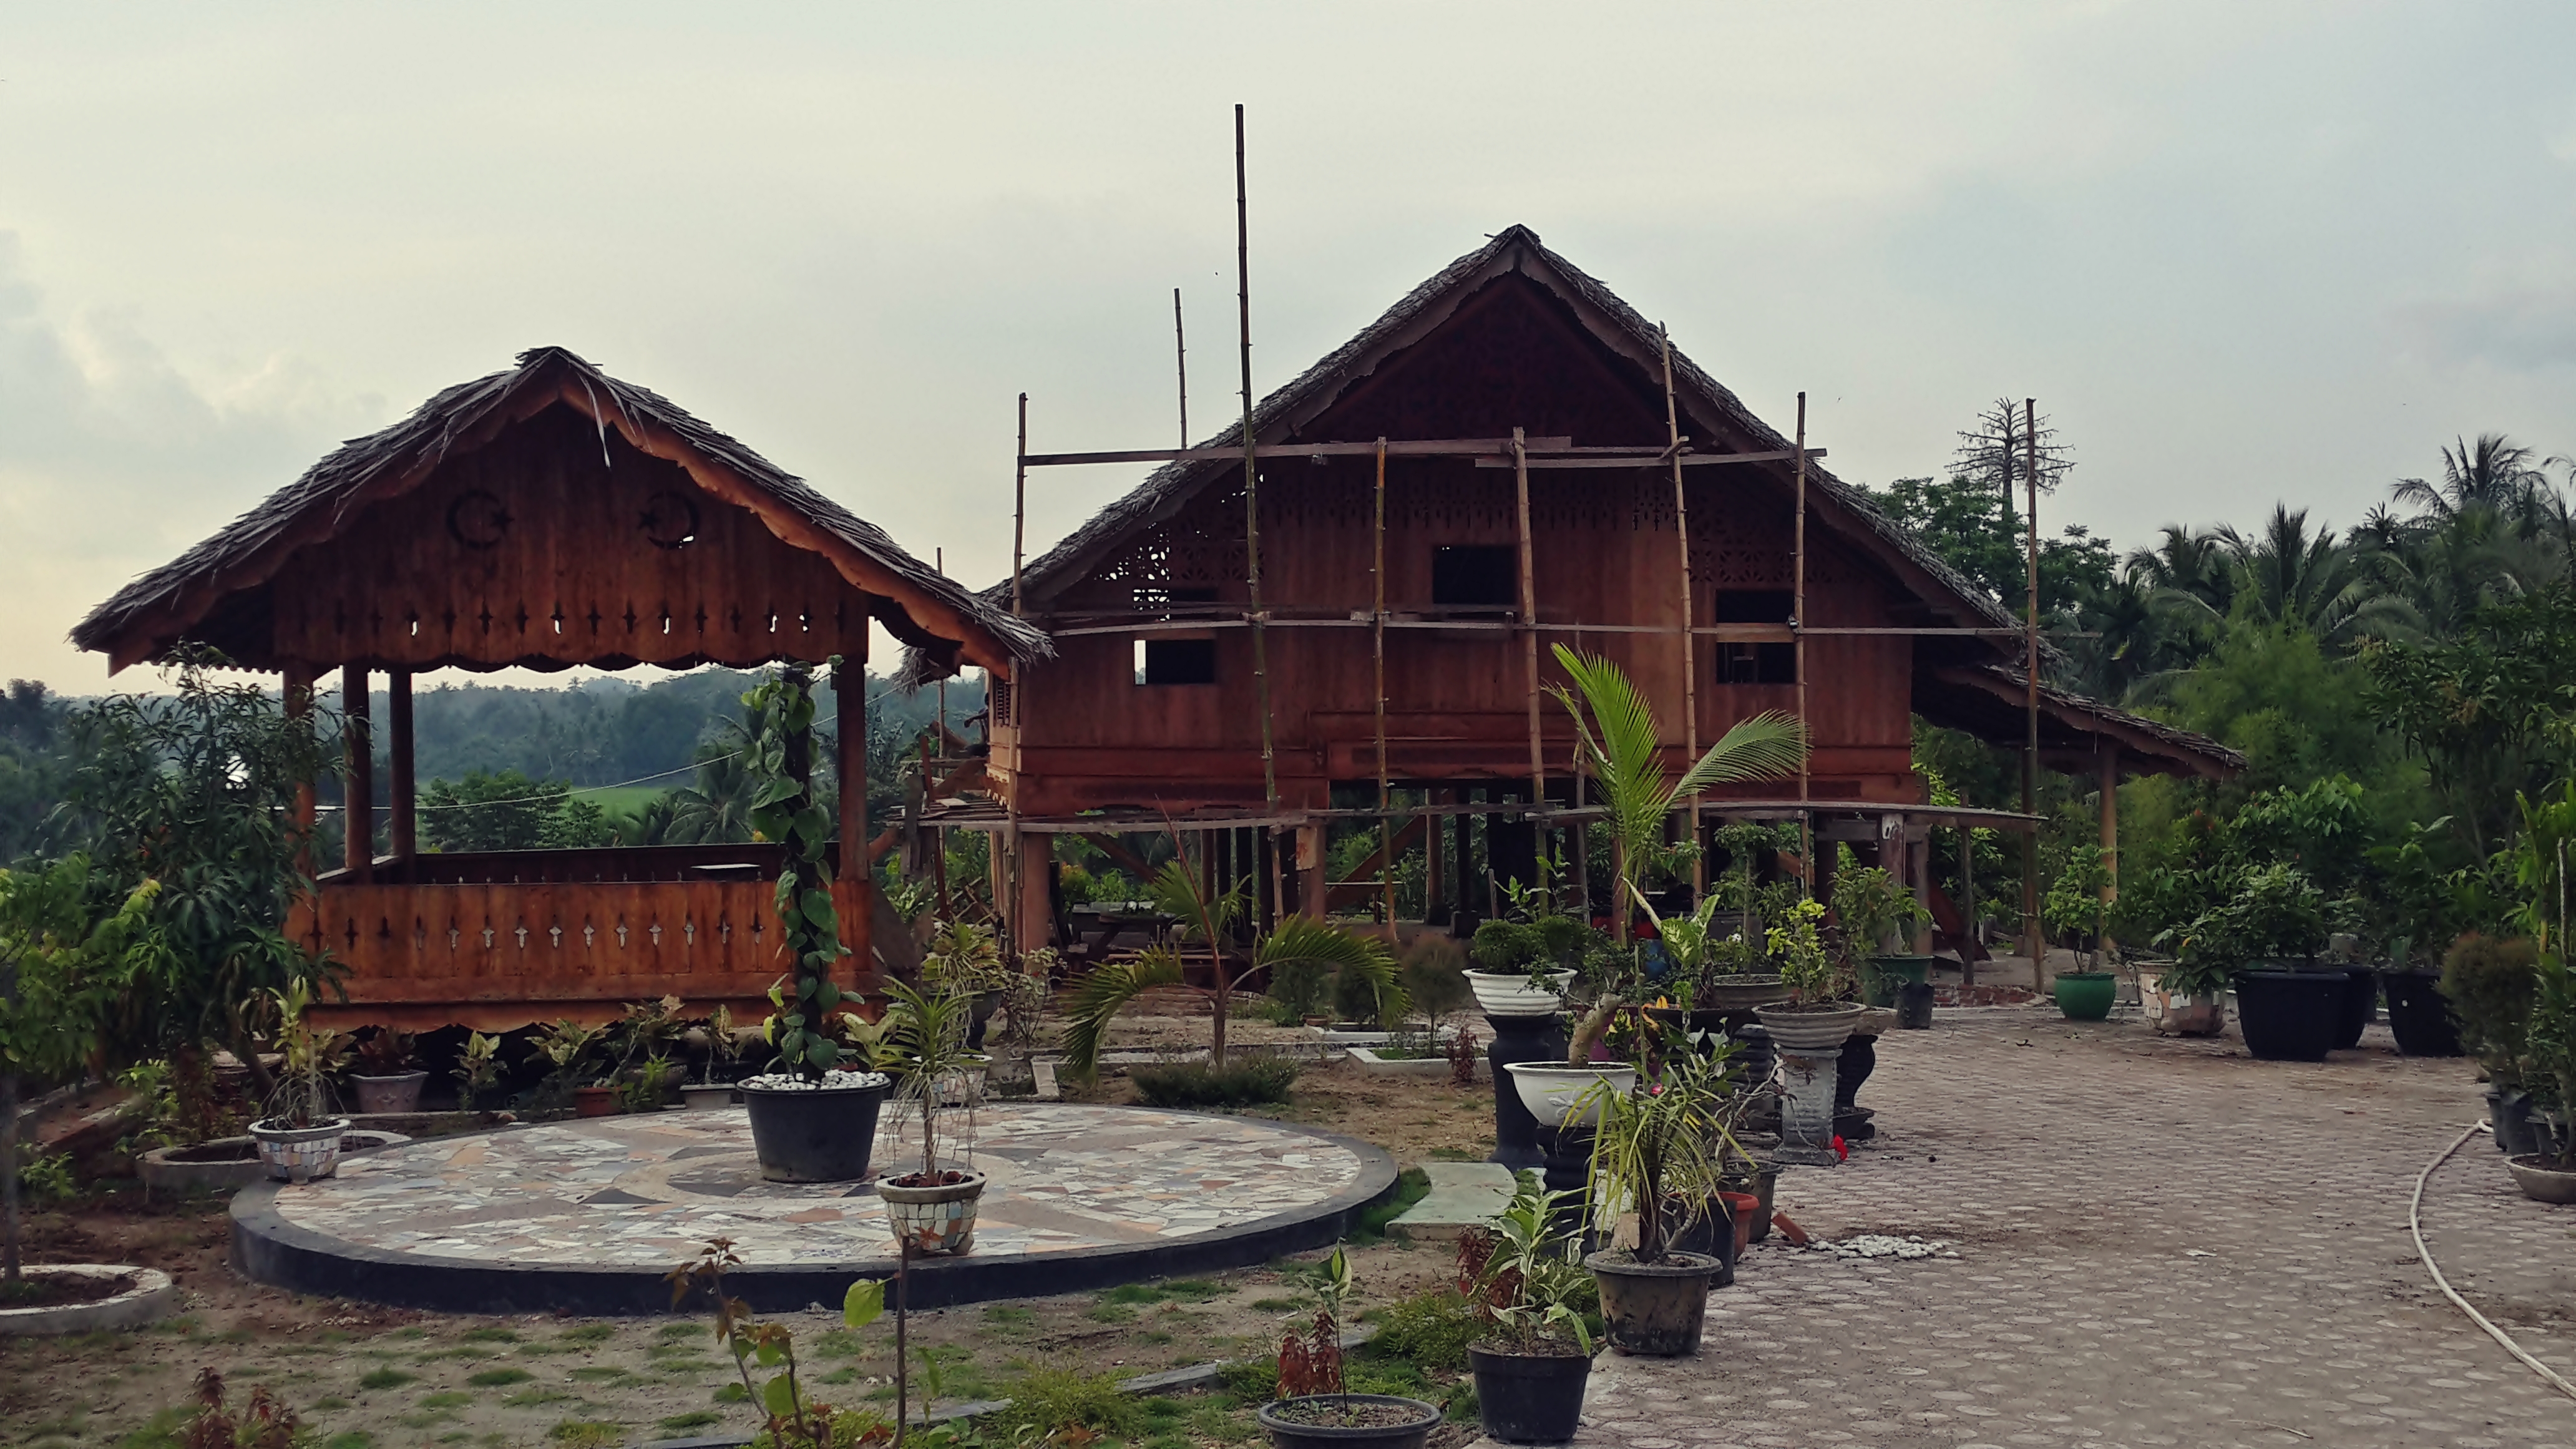  Aceh Traditional House Rumoh Adat Aceh Steemit